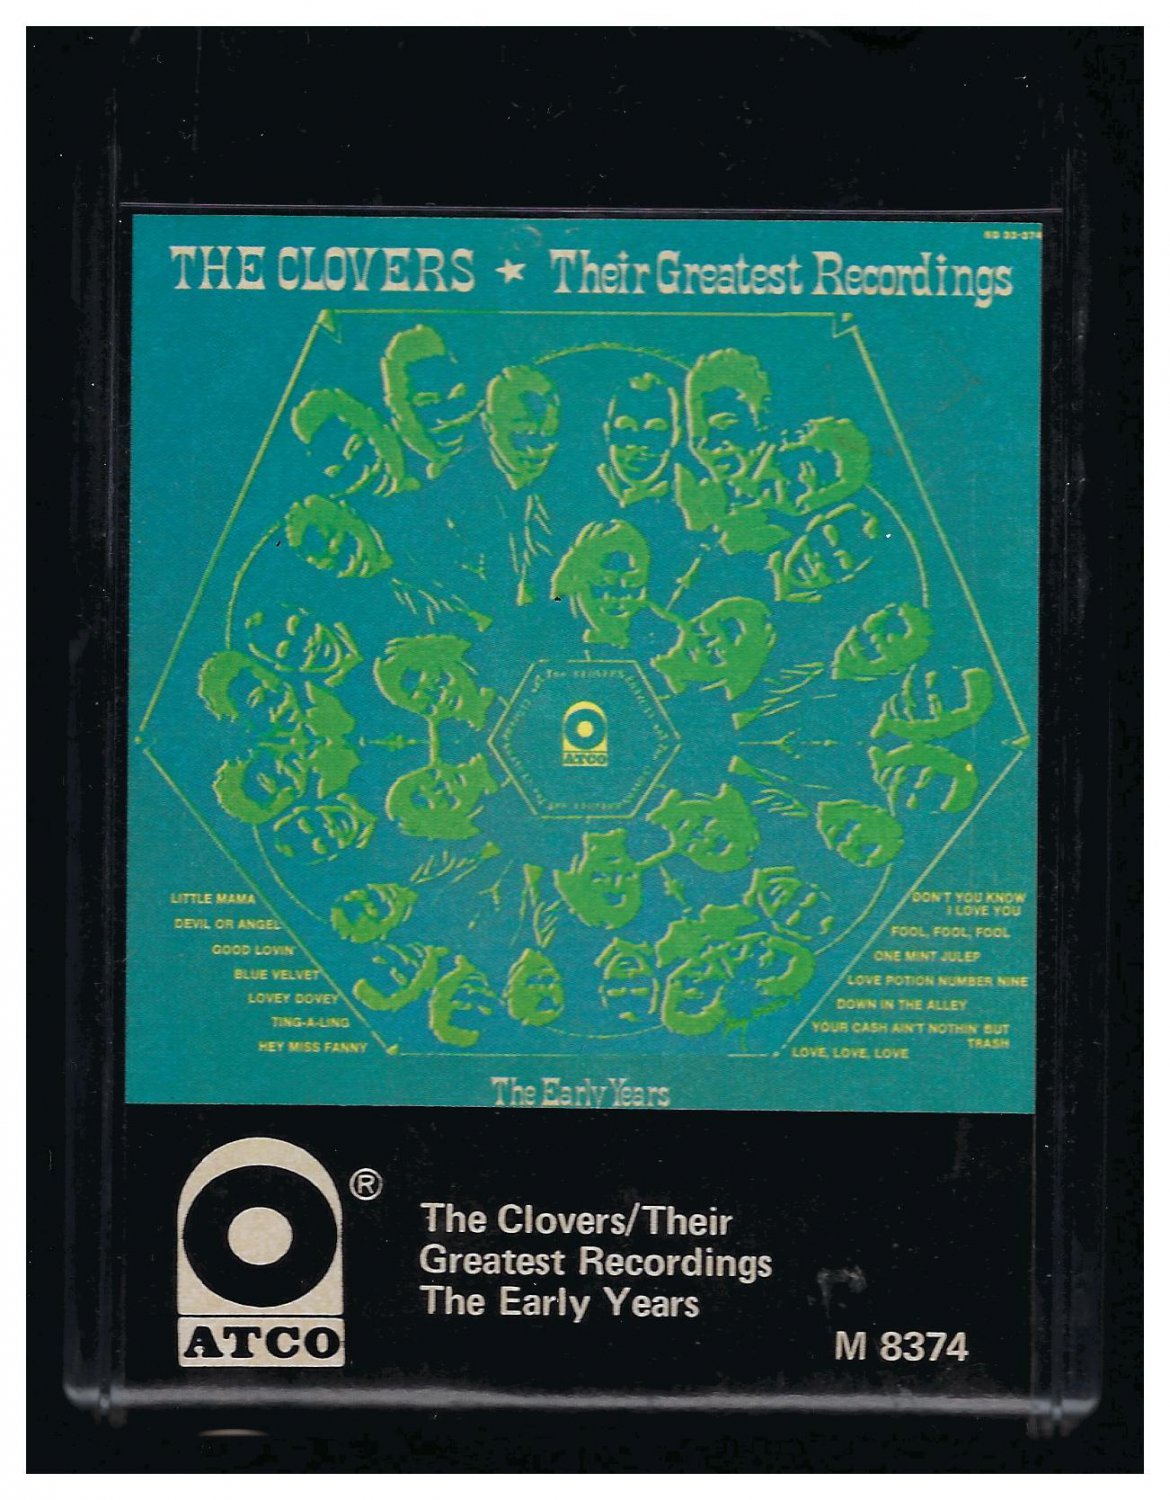 The Clovers - The Early Years Their Greatest Recordings 1971 AMPEX ATCO A25 8-TRACK TAPE